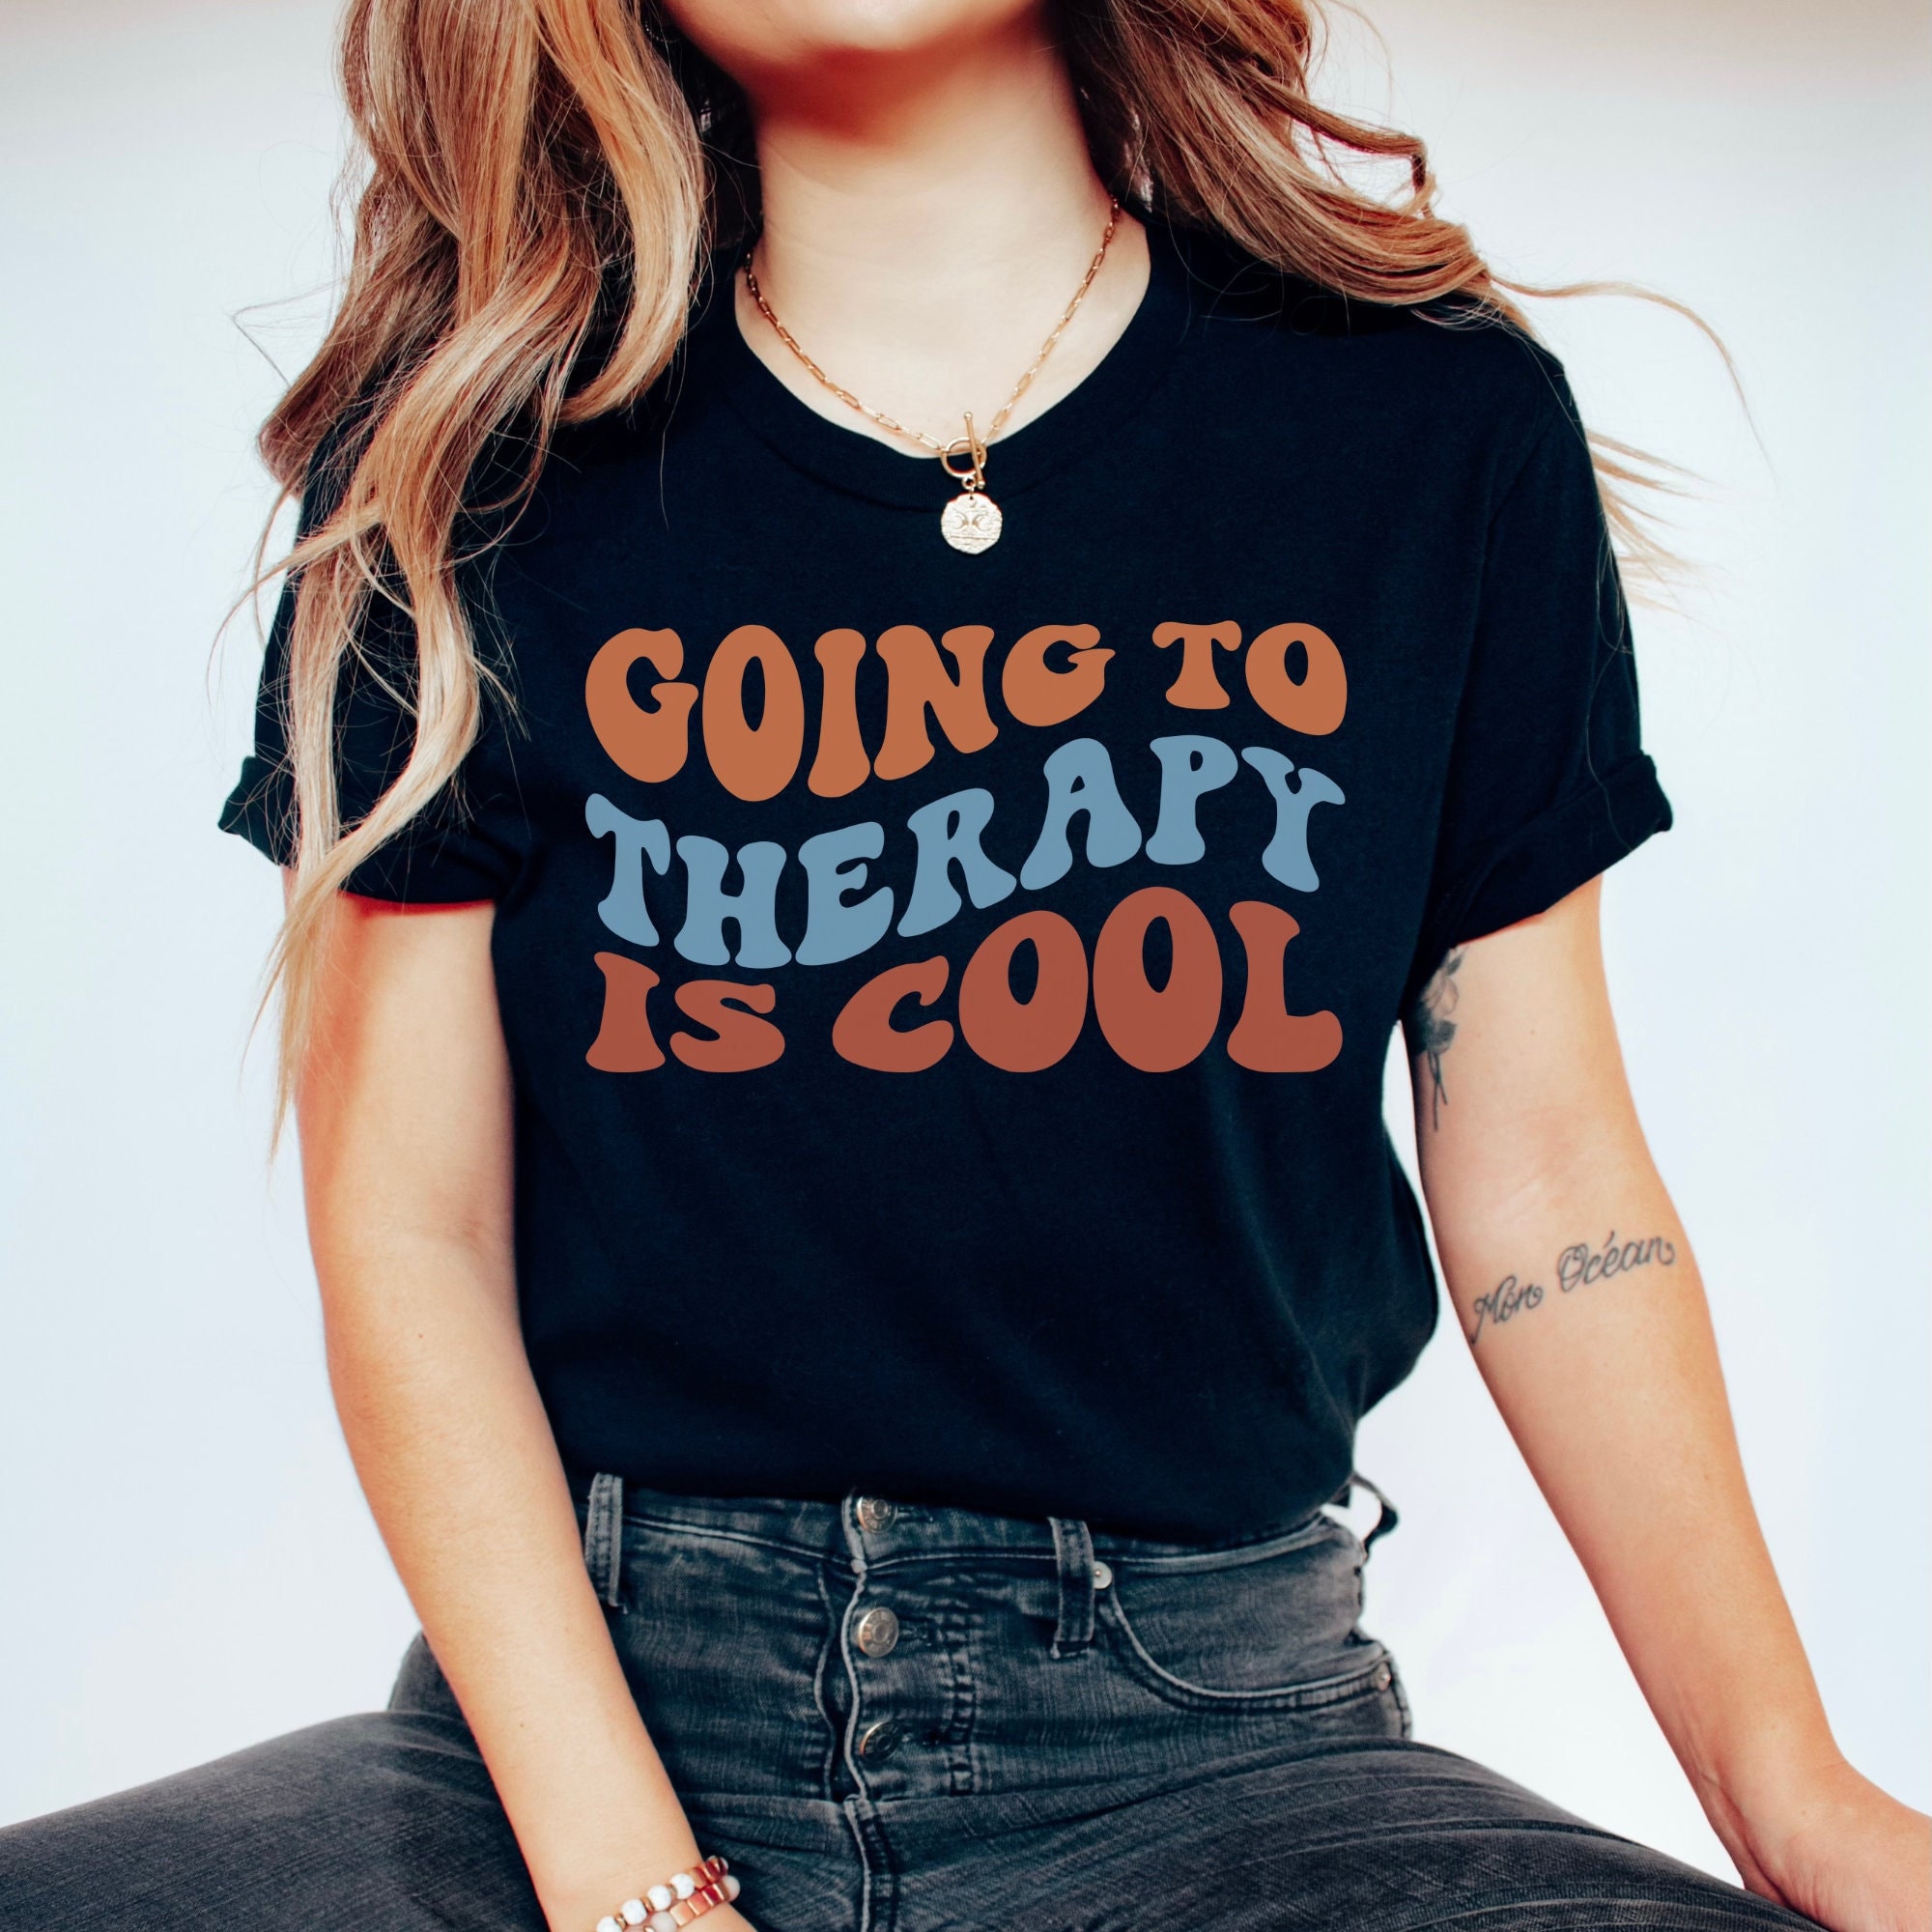 accelerator Intermediate Examen album Going to Therapy is Cool Mental Health Shirt Y2k Shirt Anxiety - Etsy